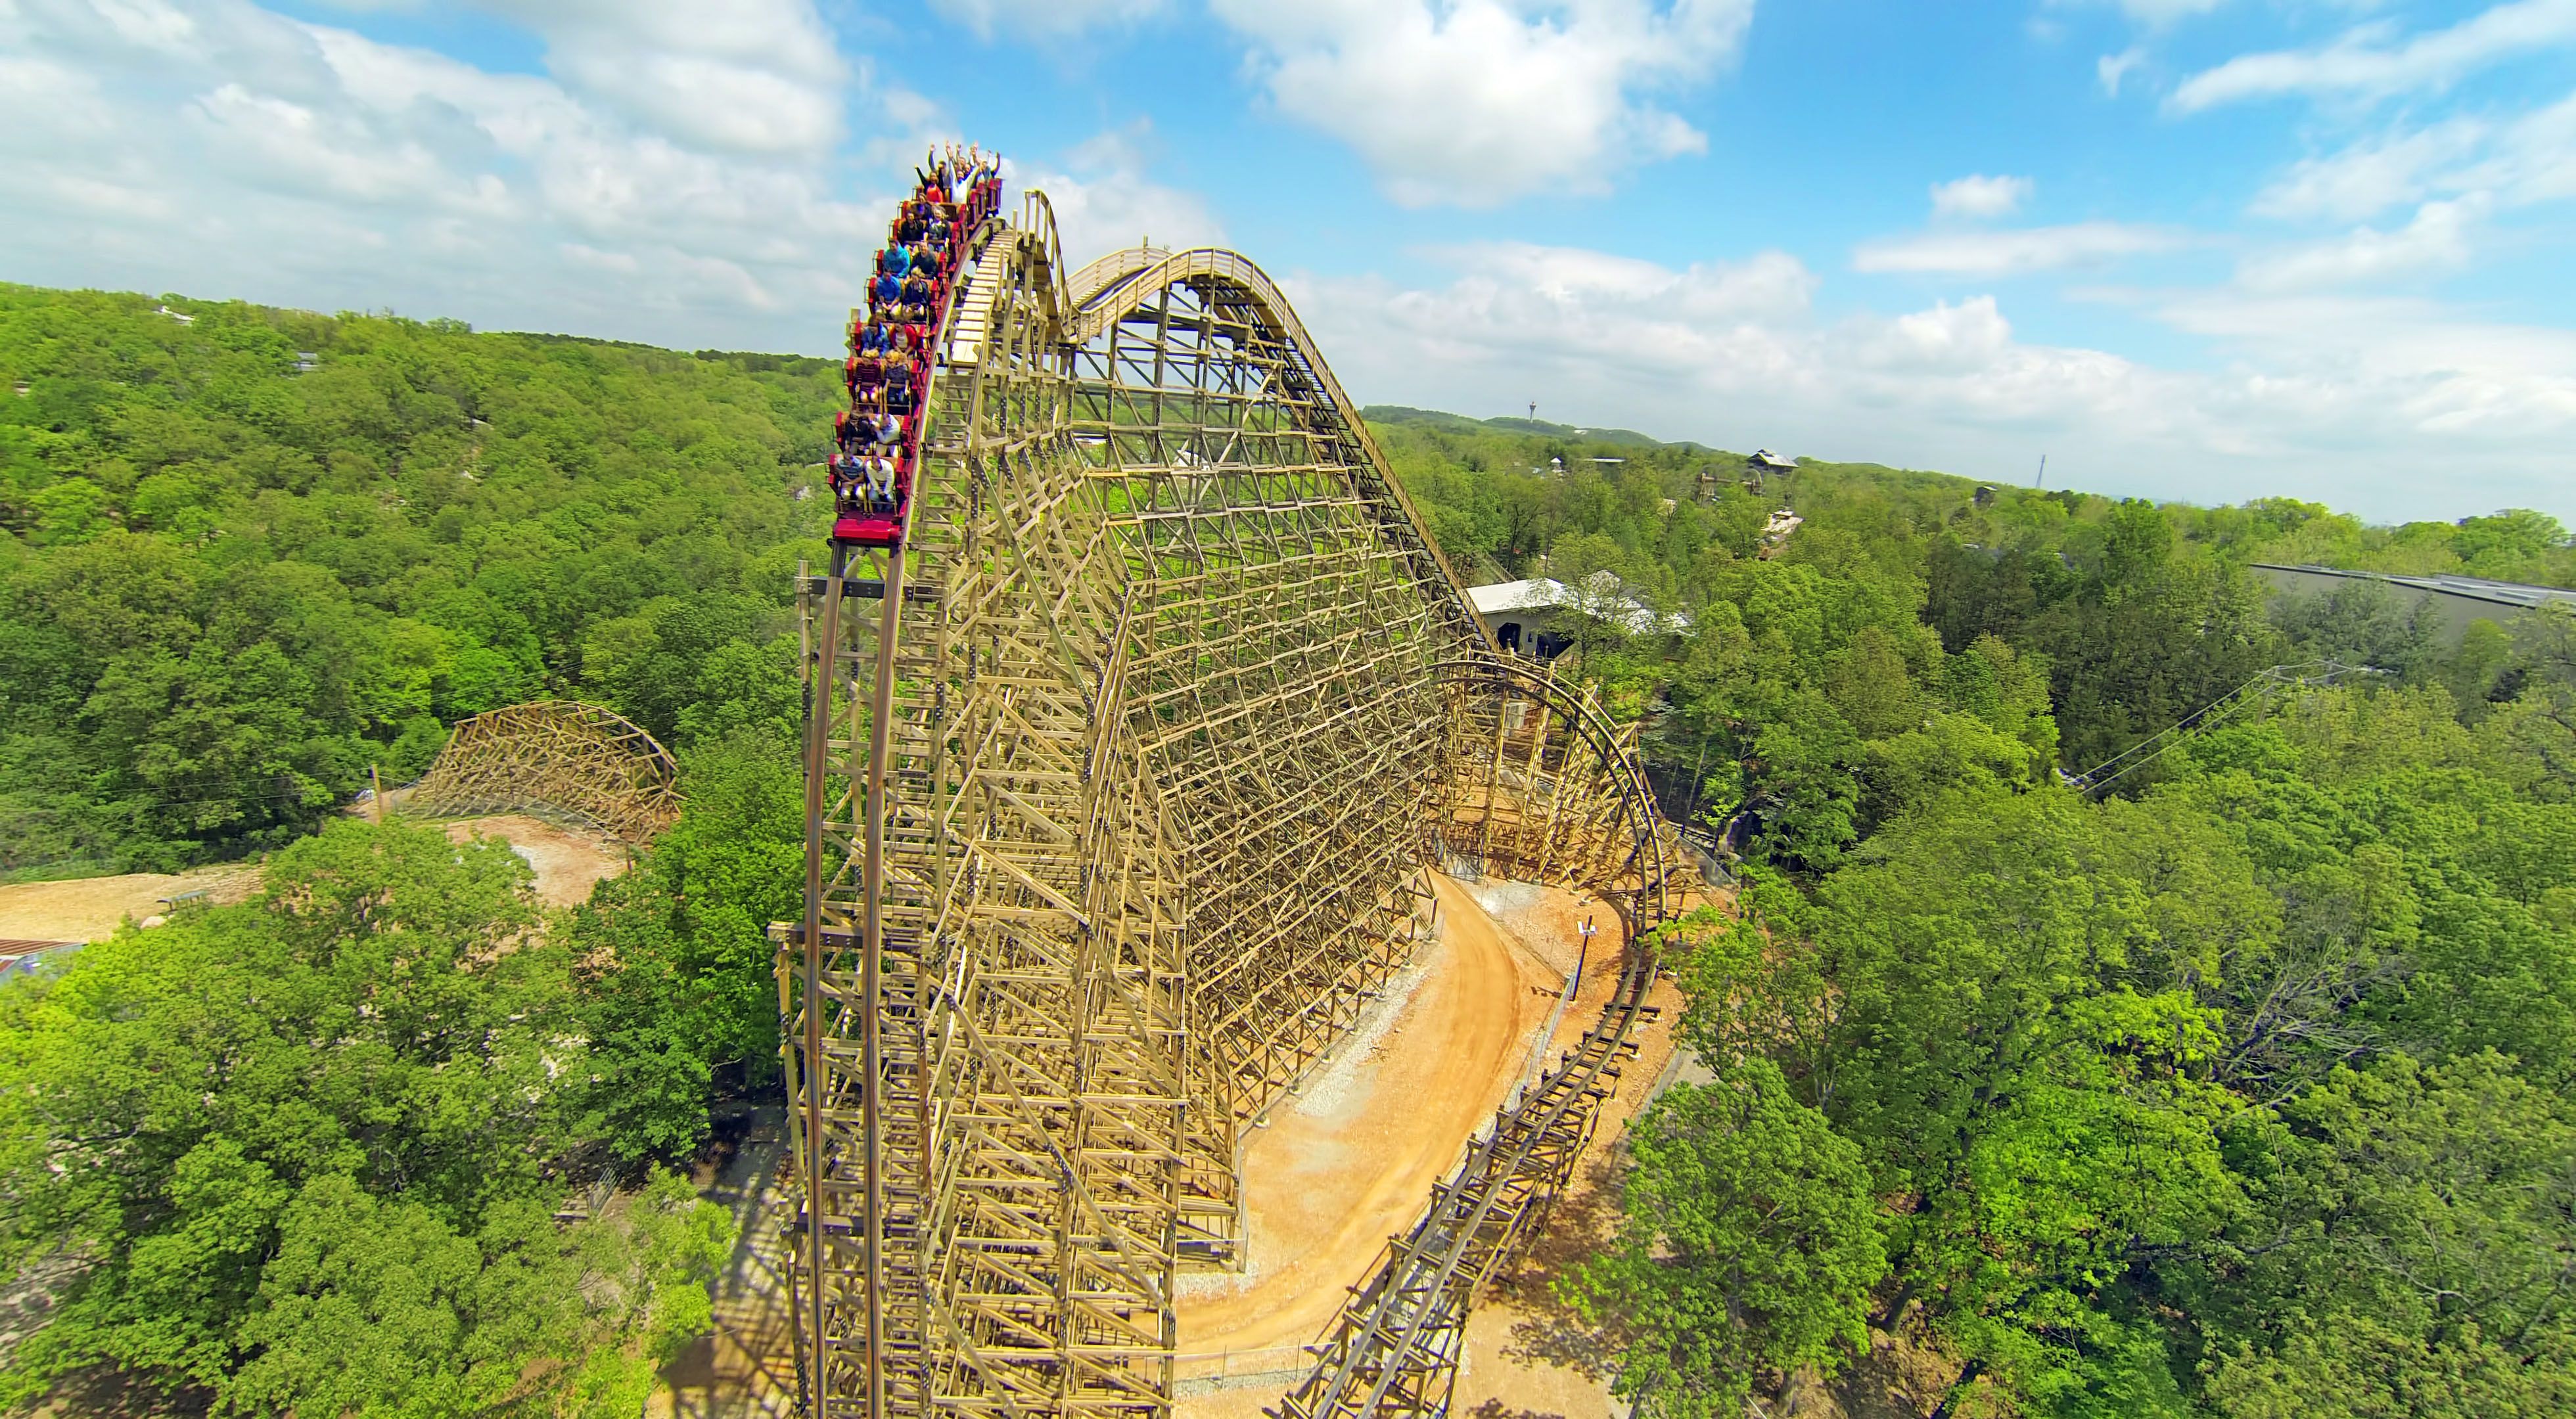 Missouri has five of world's top 100 roller coasters, according to